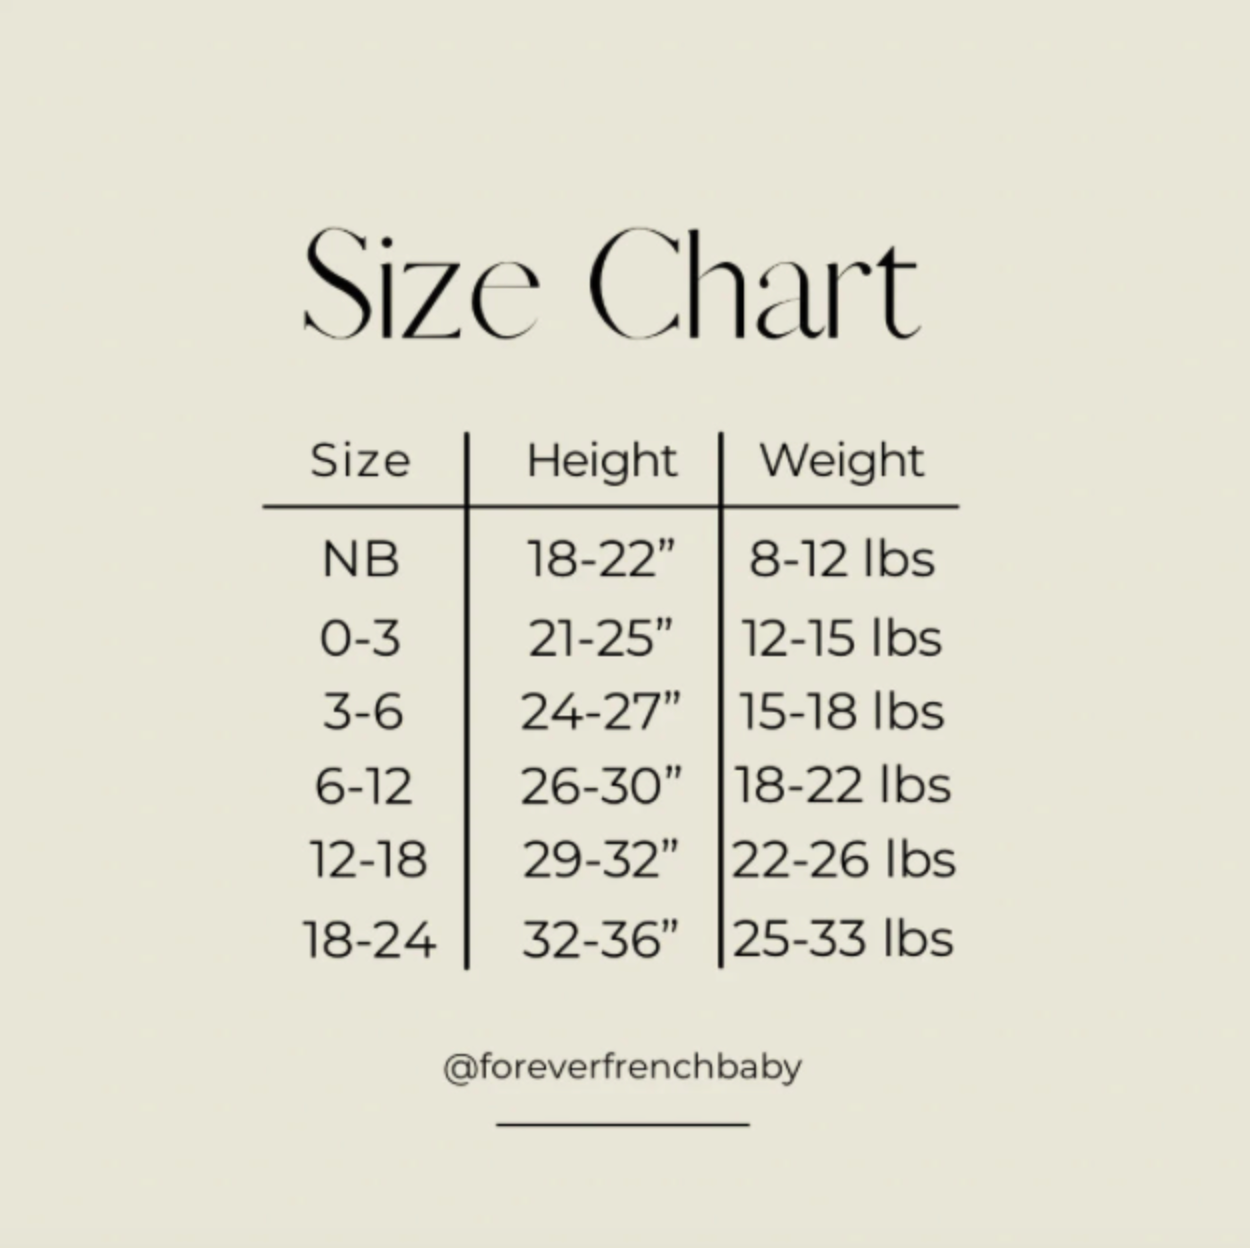 a chart of size and weight